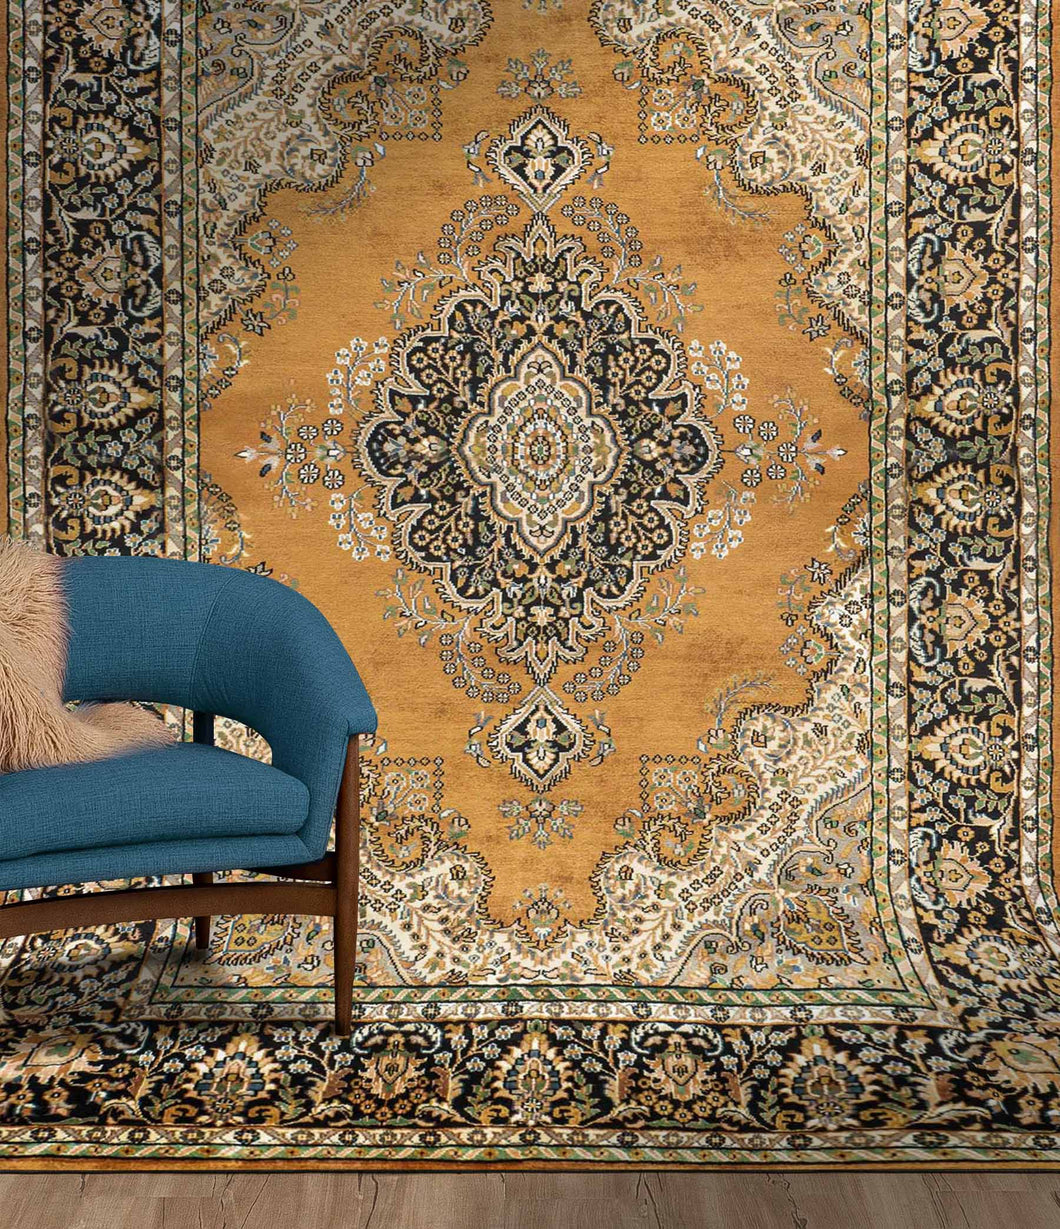 Full shot of a botemir design hand knotted Indian carpet also known as a oriental rug, in a room setting.